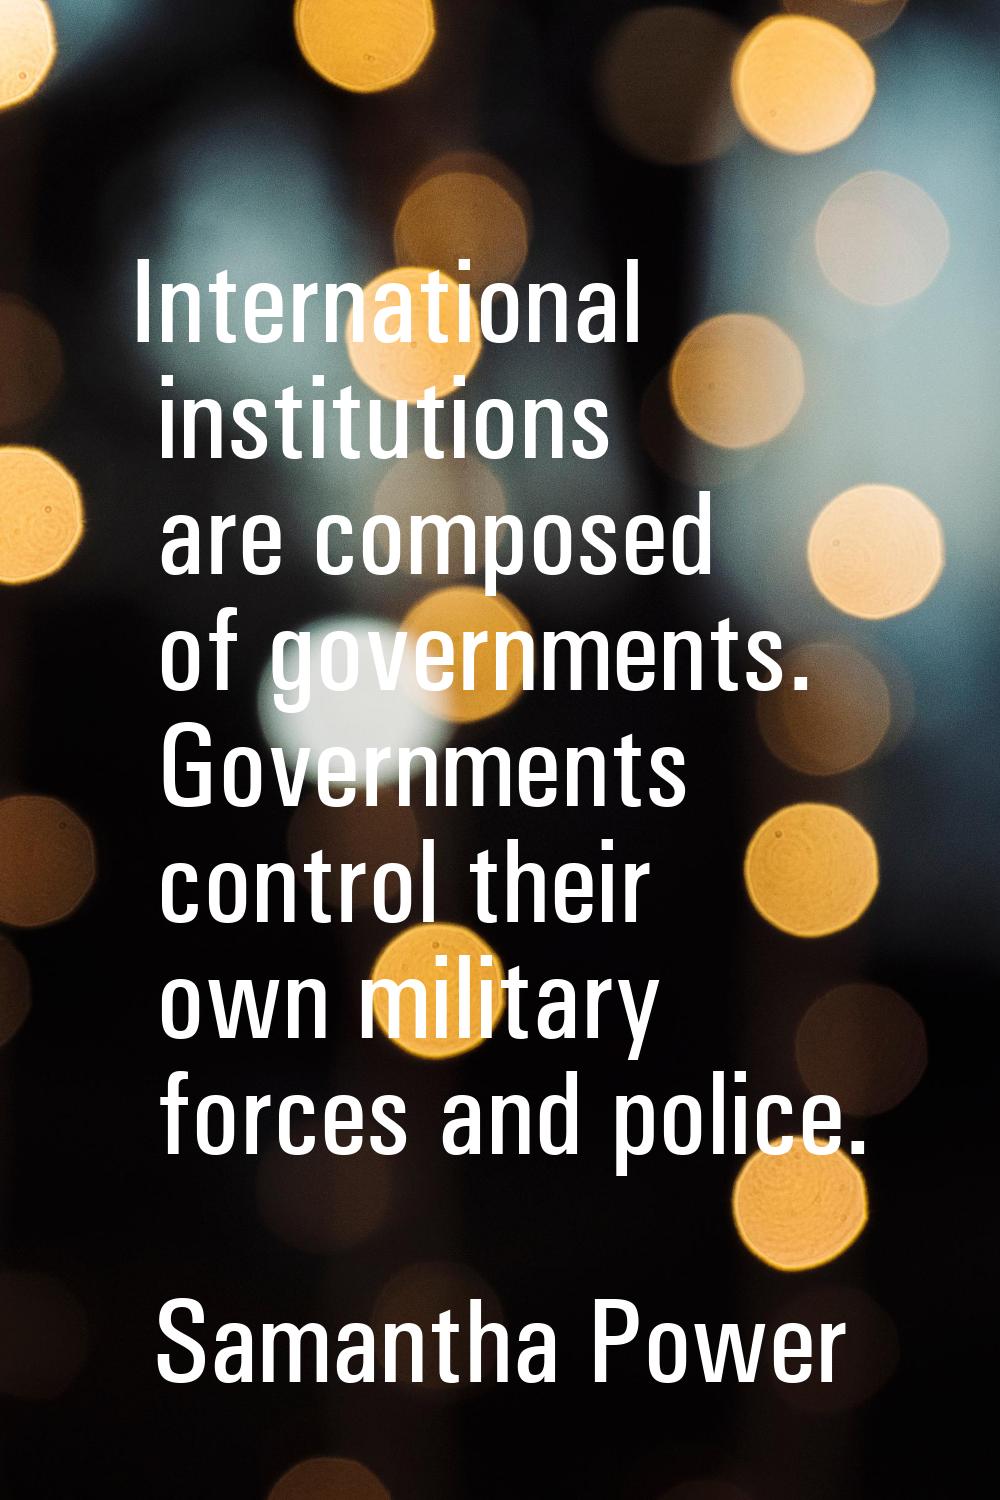 International institutions are composed of governments. Governments control their own military forc